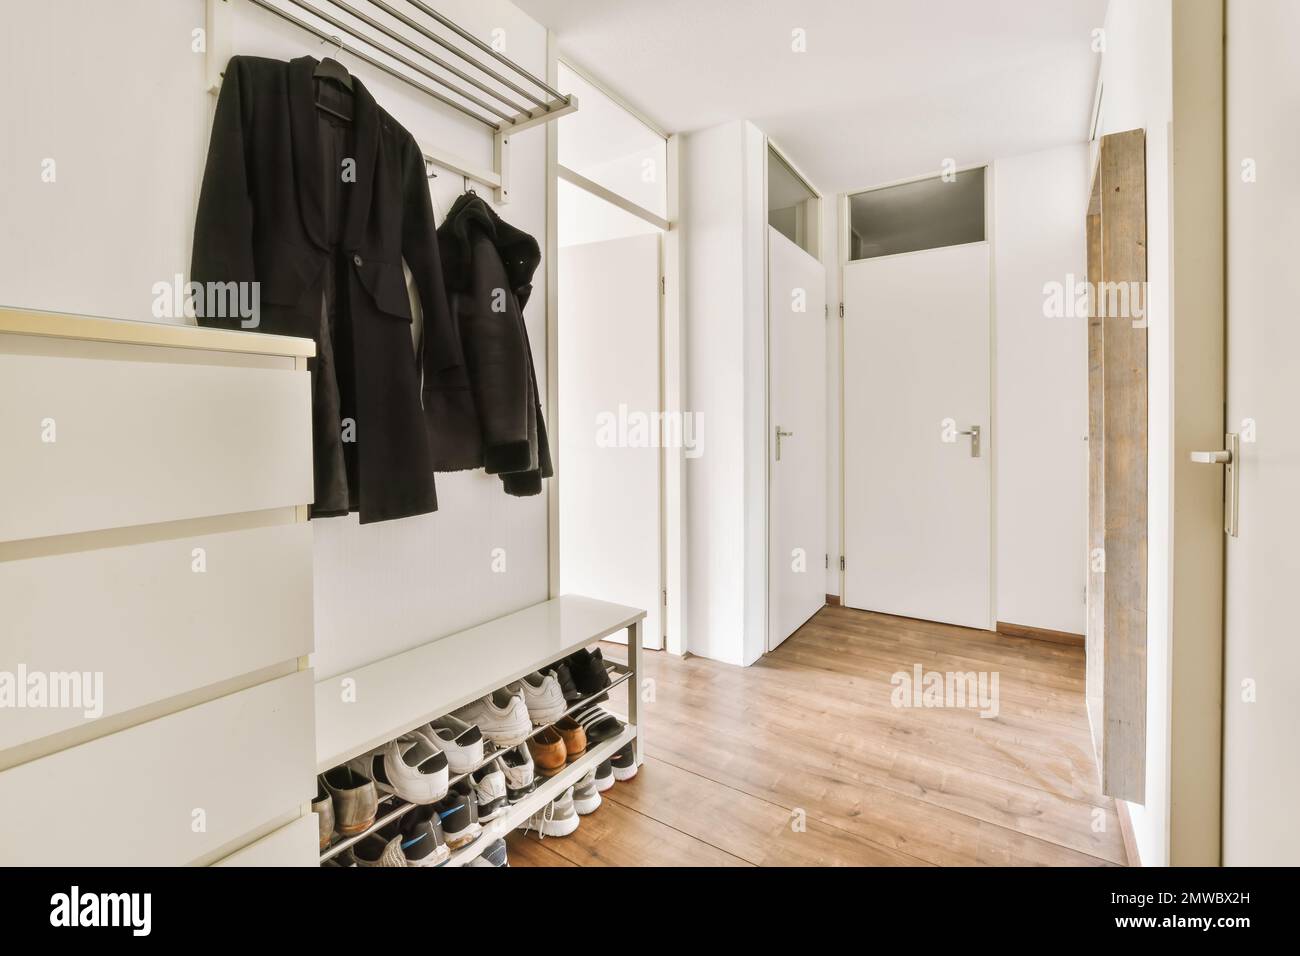 - closet Page Alamy in and Walk stock photography hi-res - 12 images